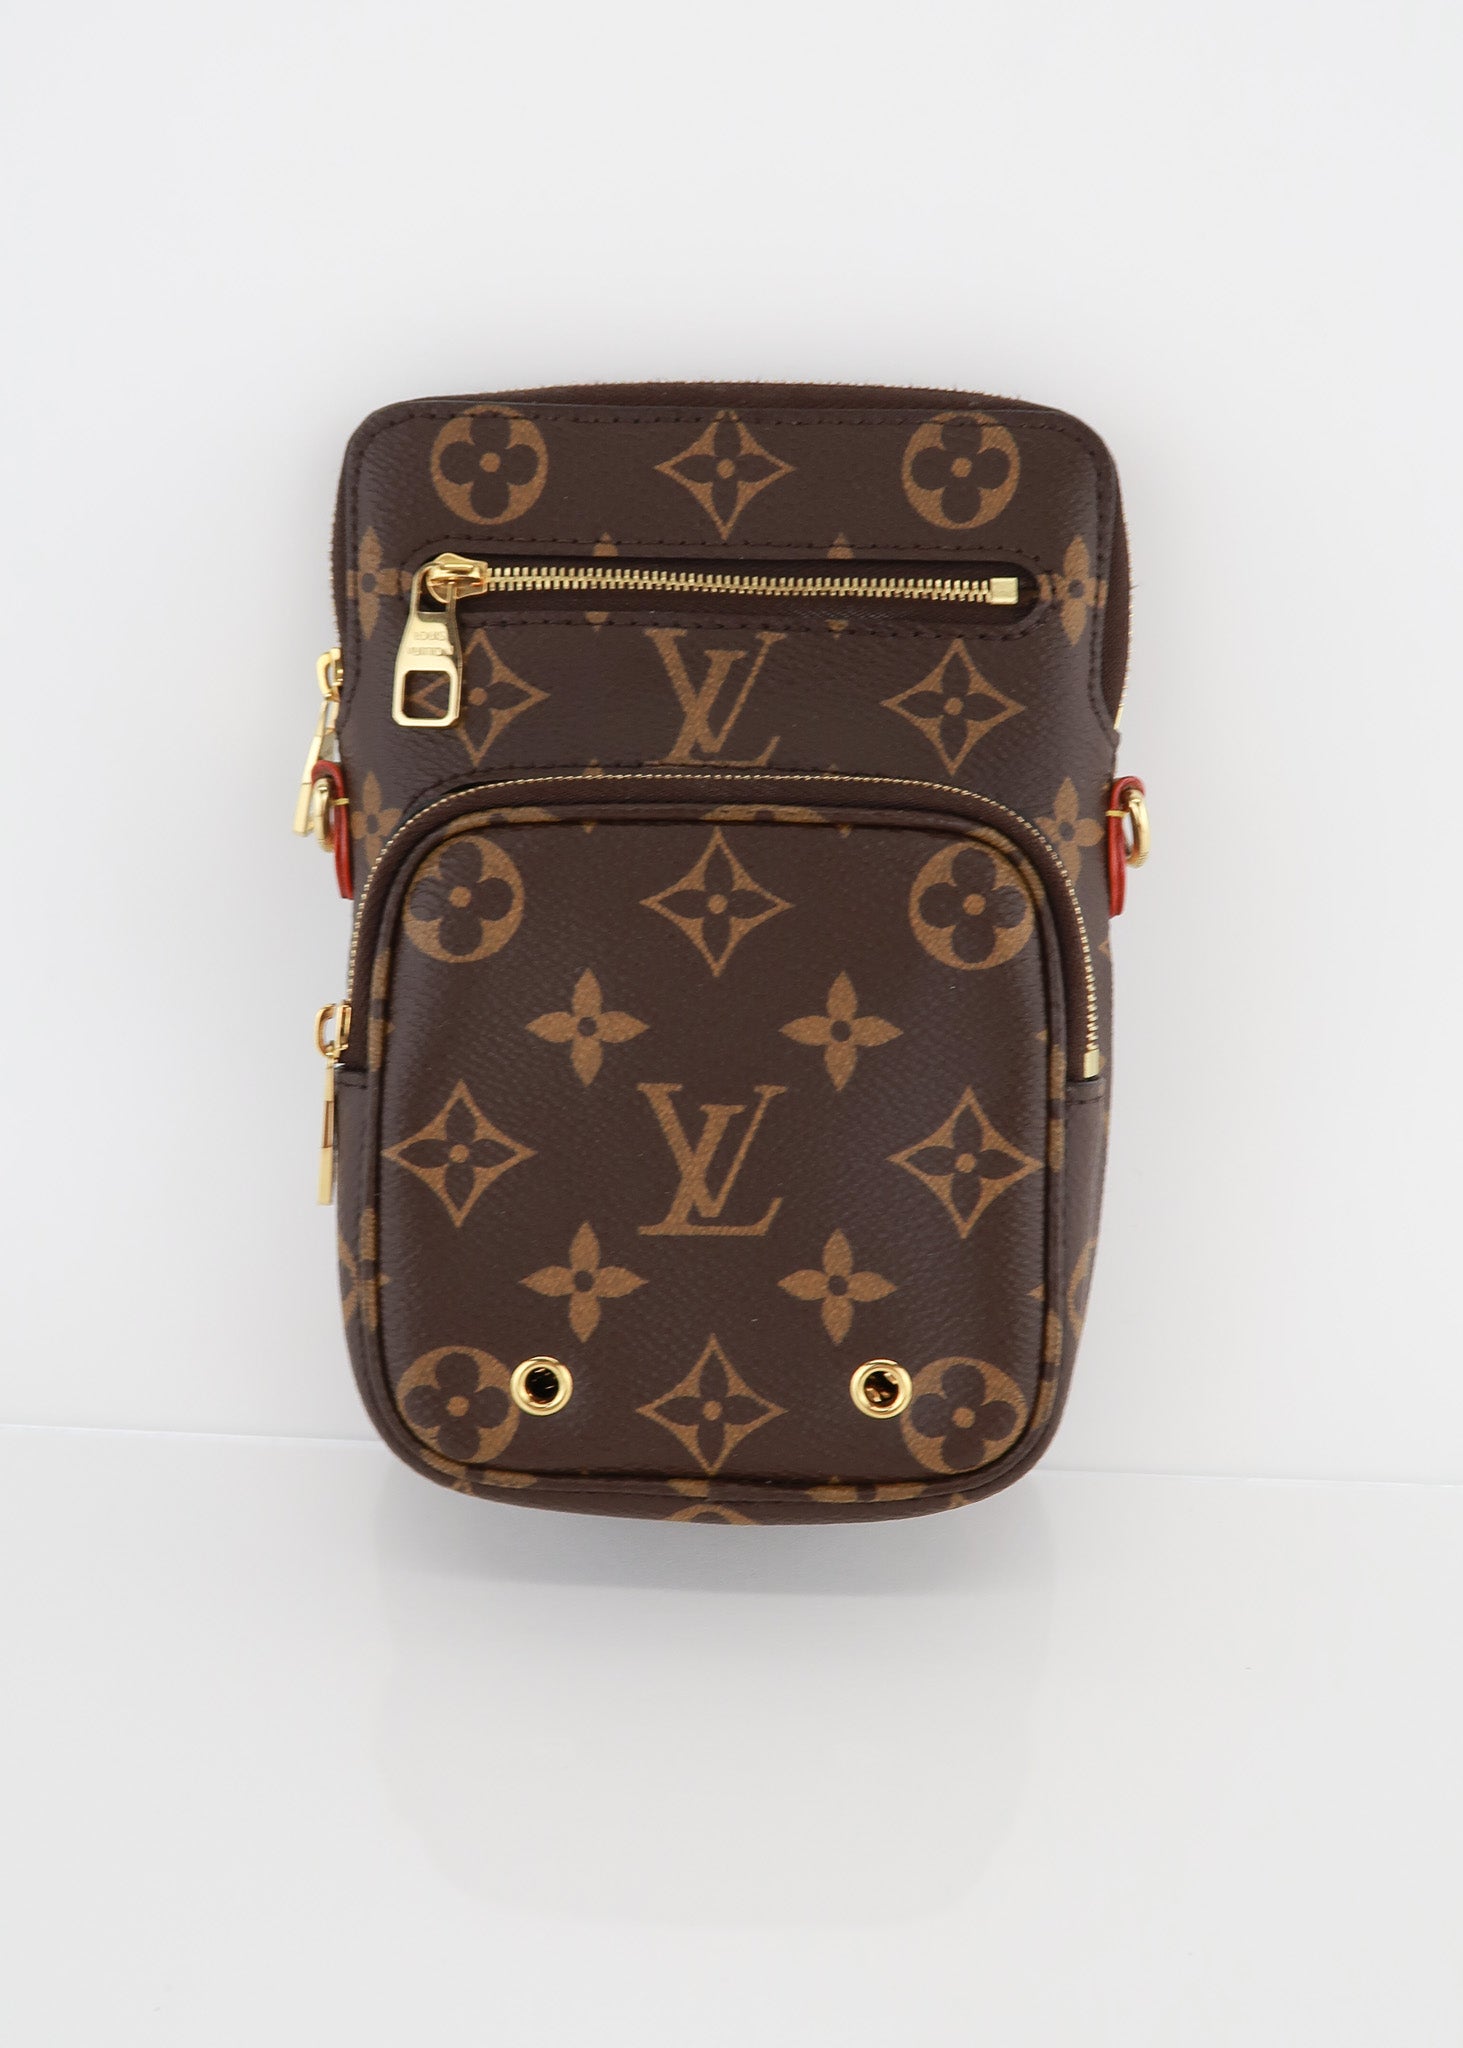 Louis Vuitton Phone Crossbody - 8 For Sale on 1stDibs  louis vuitton phone  case crossbody, lv phone crossbody bag, louis vuitton cellphone bag